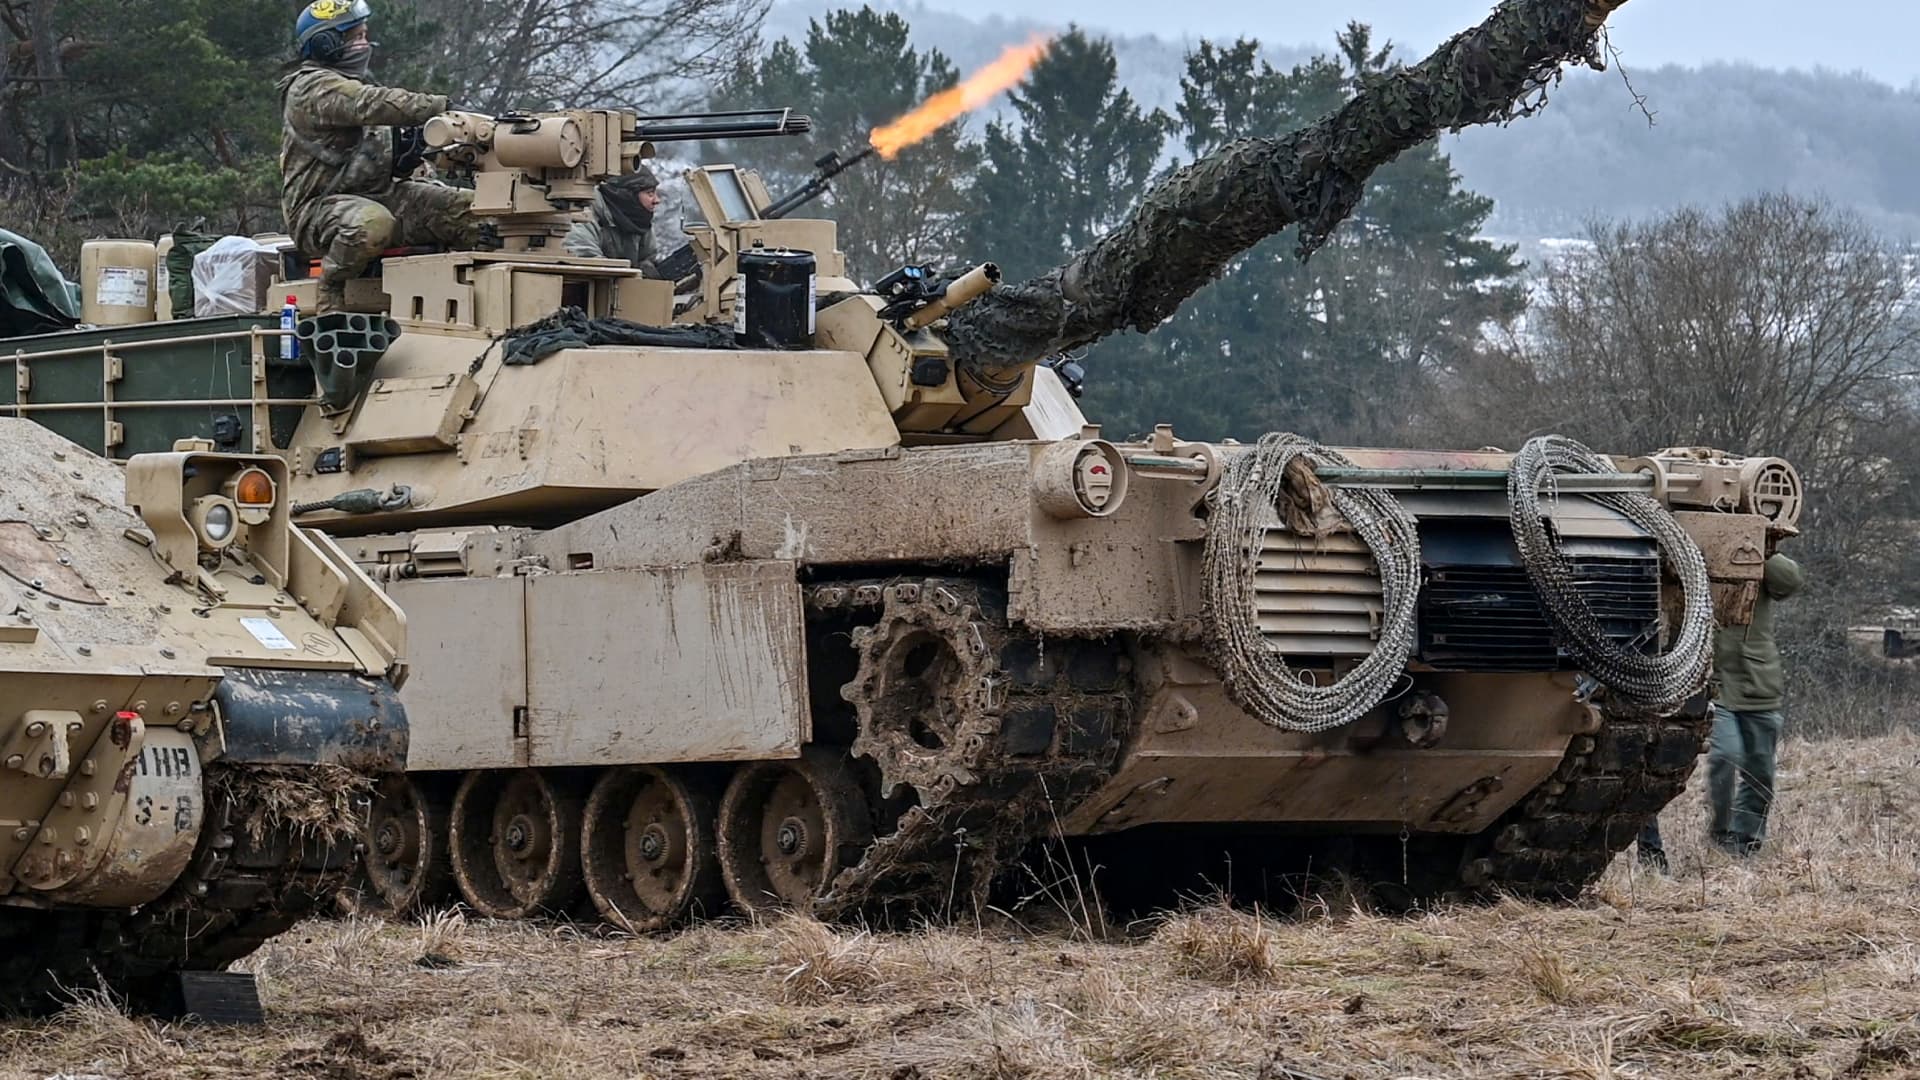 U.S. soldiers fire from an M1 Abrams main battle tank.